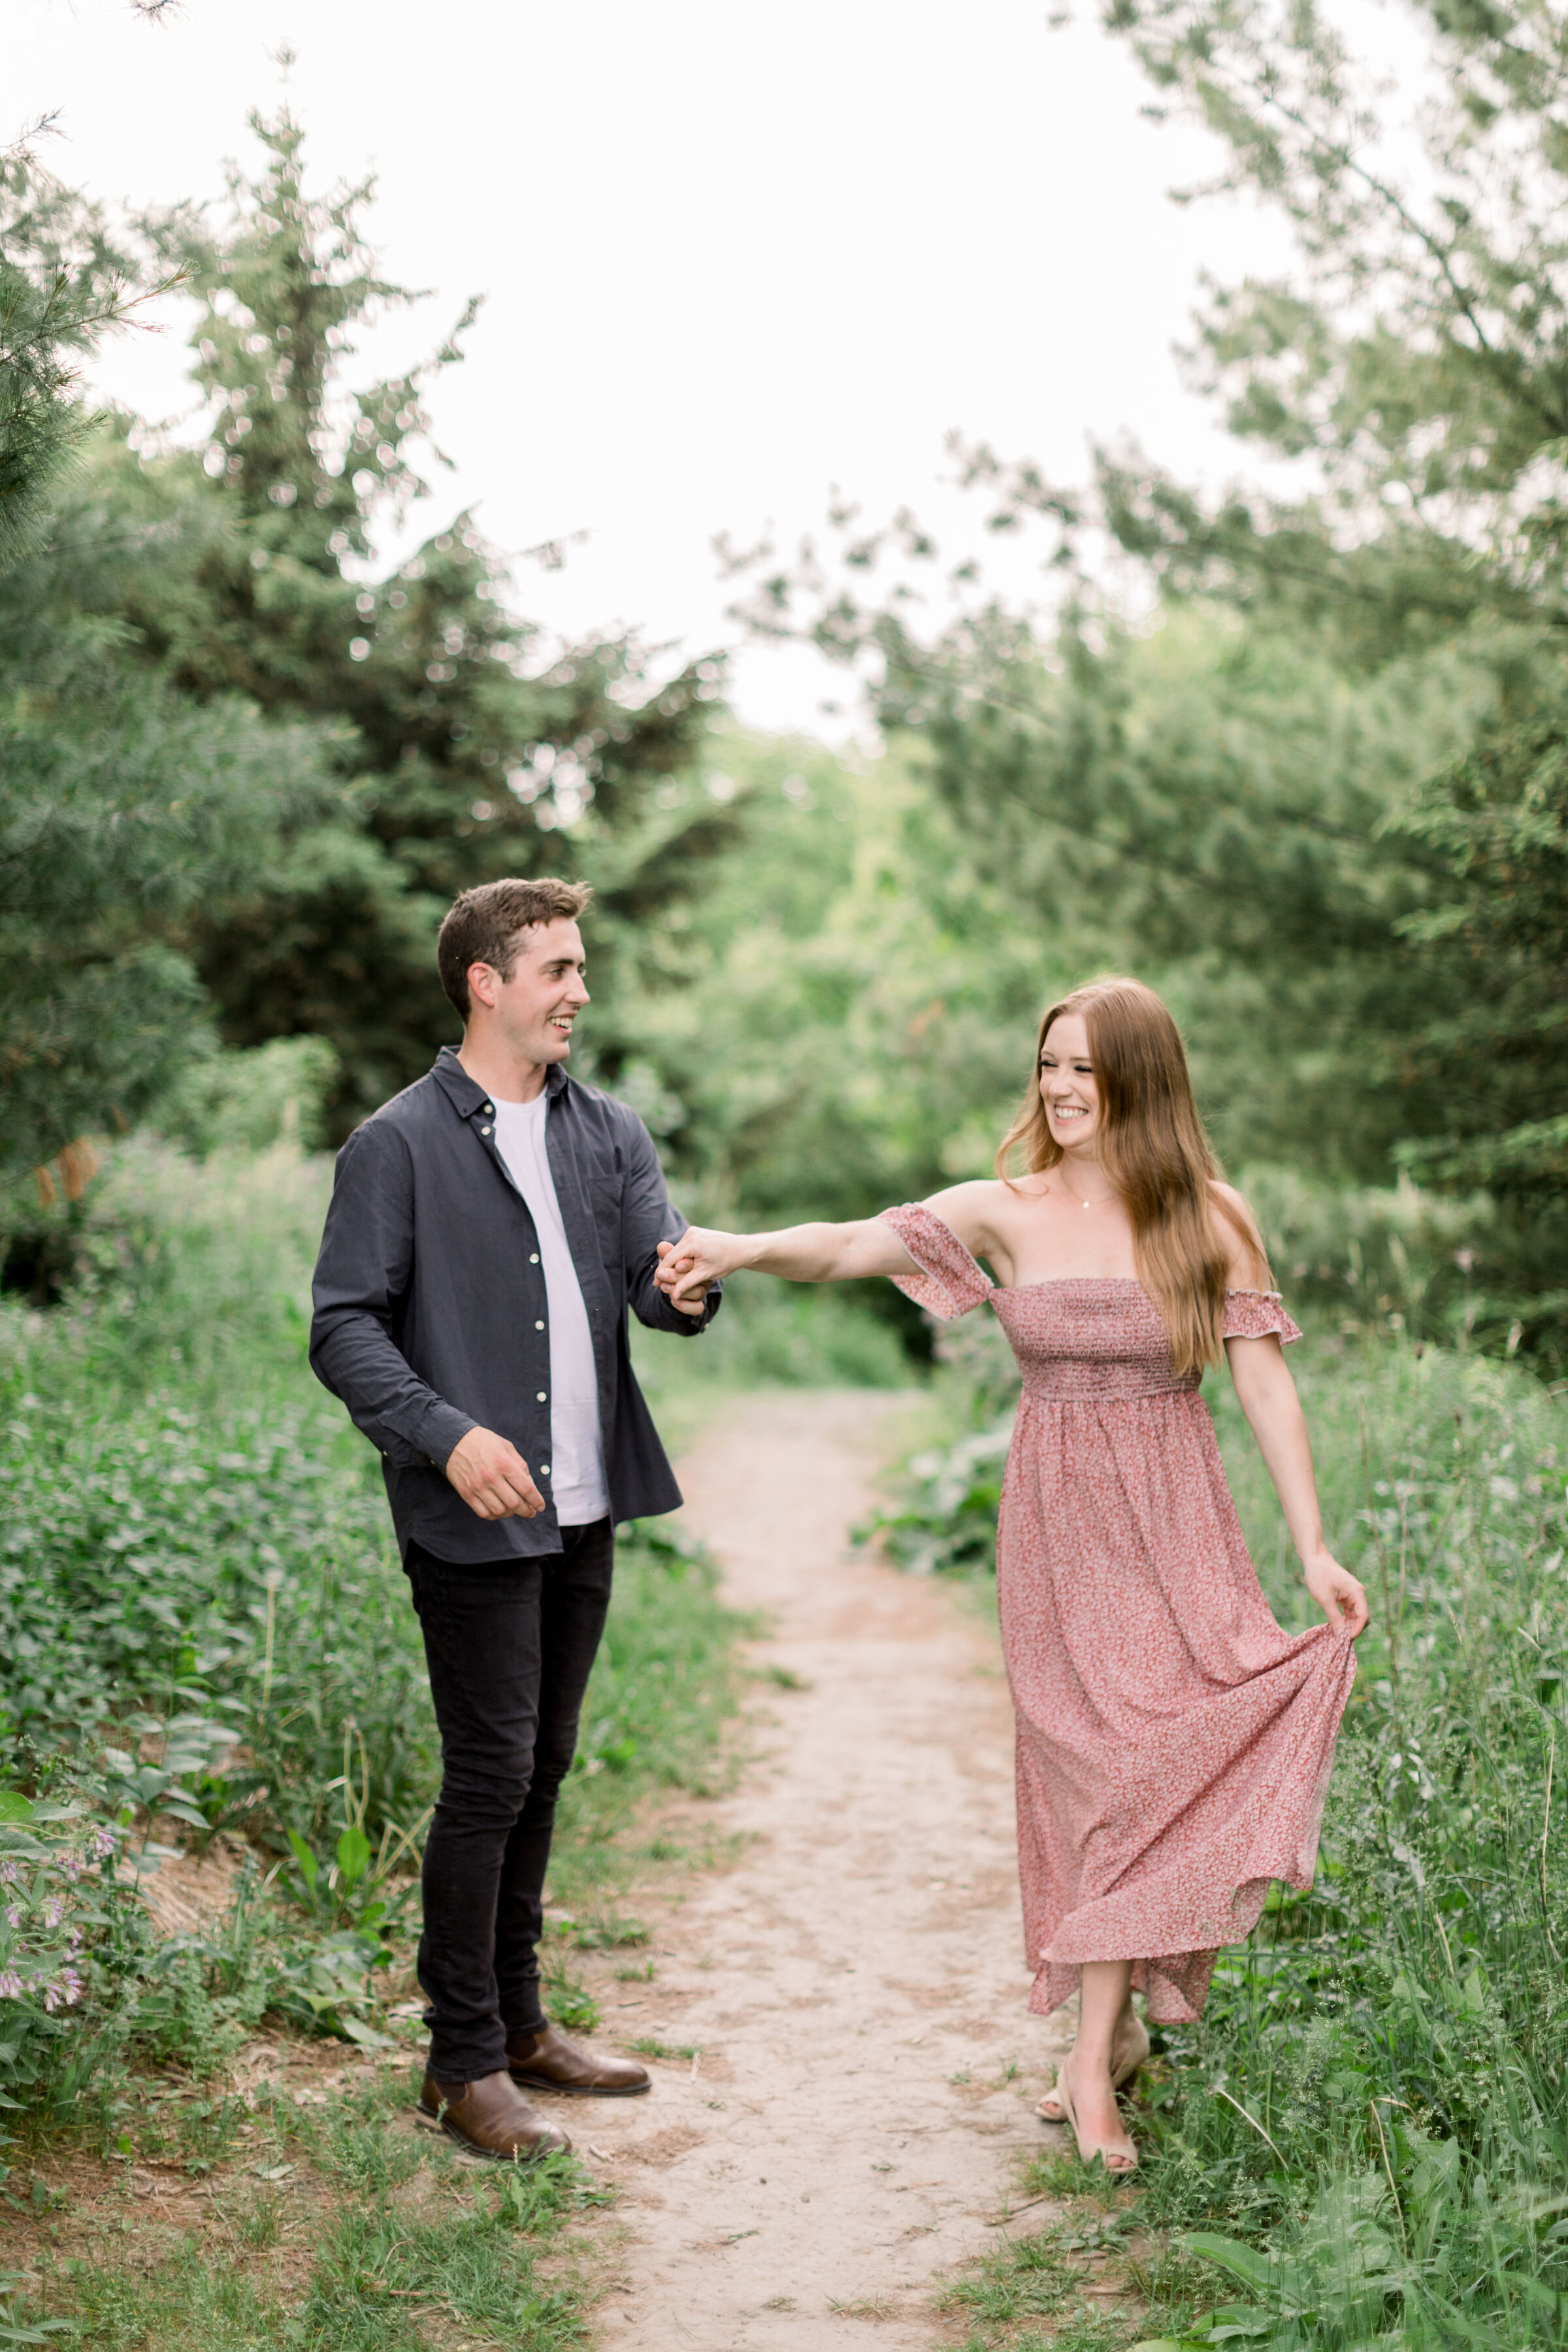  In Arboretum, Ottawa, Chelsea Mason Photography captures this couple playfully holding hands and walking down a shaded unpaved pathway. women's off the shoulder dress formal engagement outfits couple holding hands arboretum photographer women's long